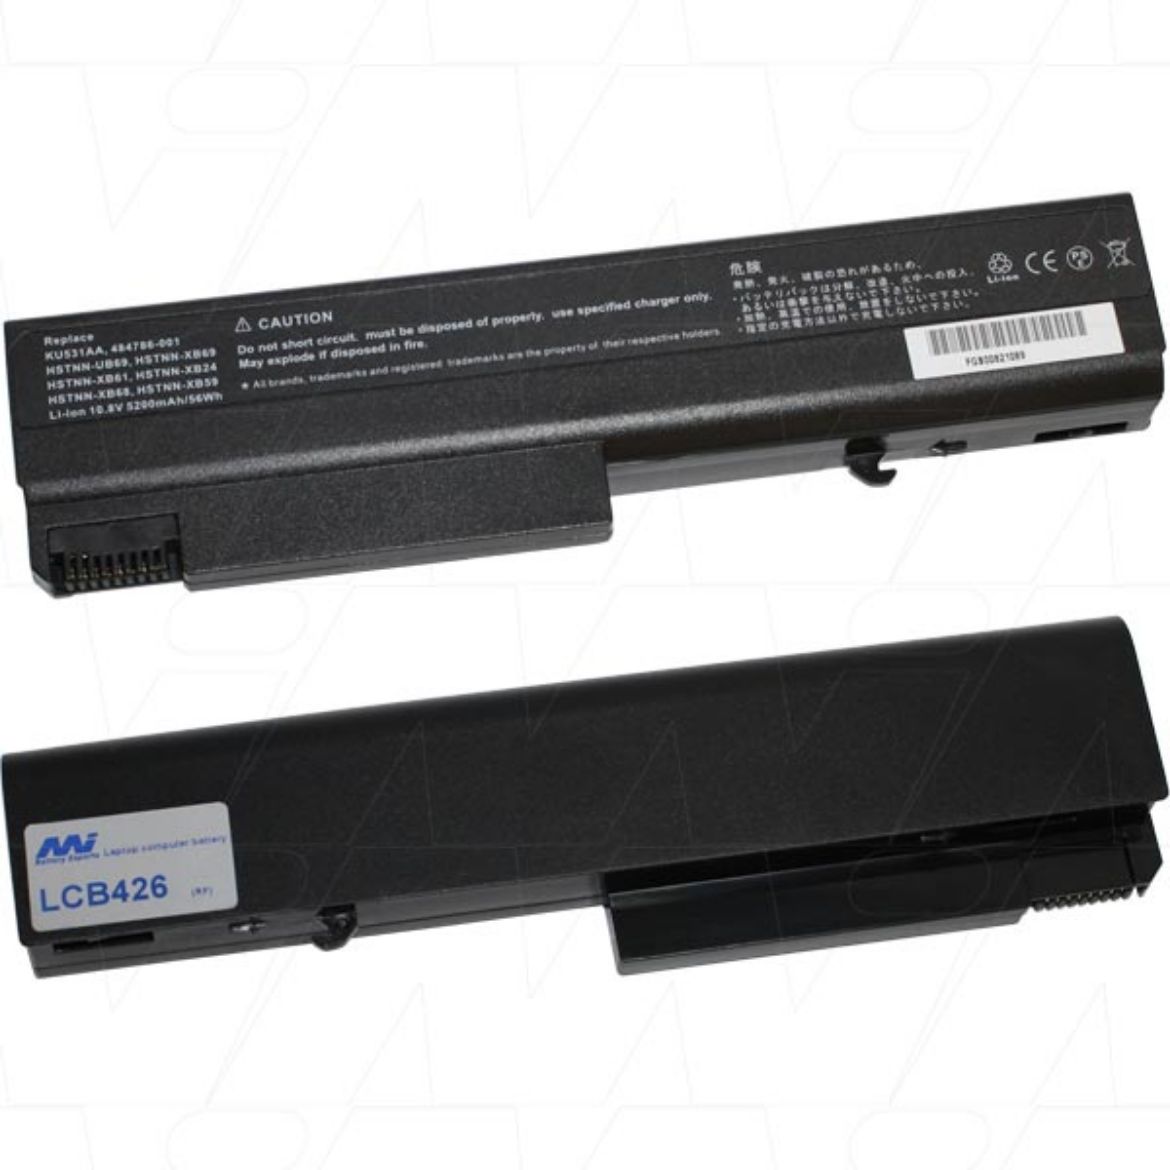 Picture of LCB426 10.8V 5200MAH LI-ION BATTERY SUITABLE FOR HP LAPTOP ( )